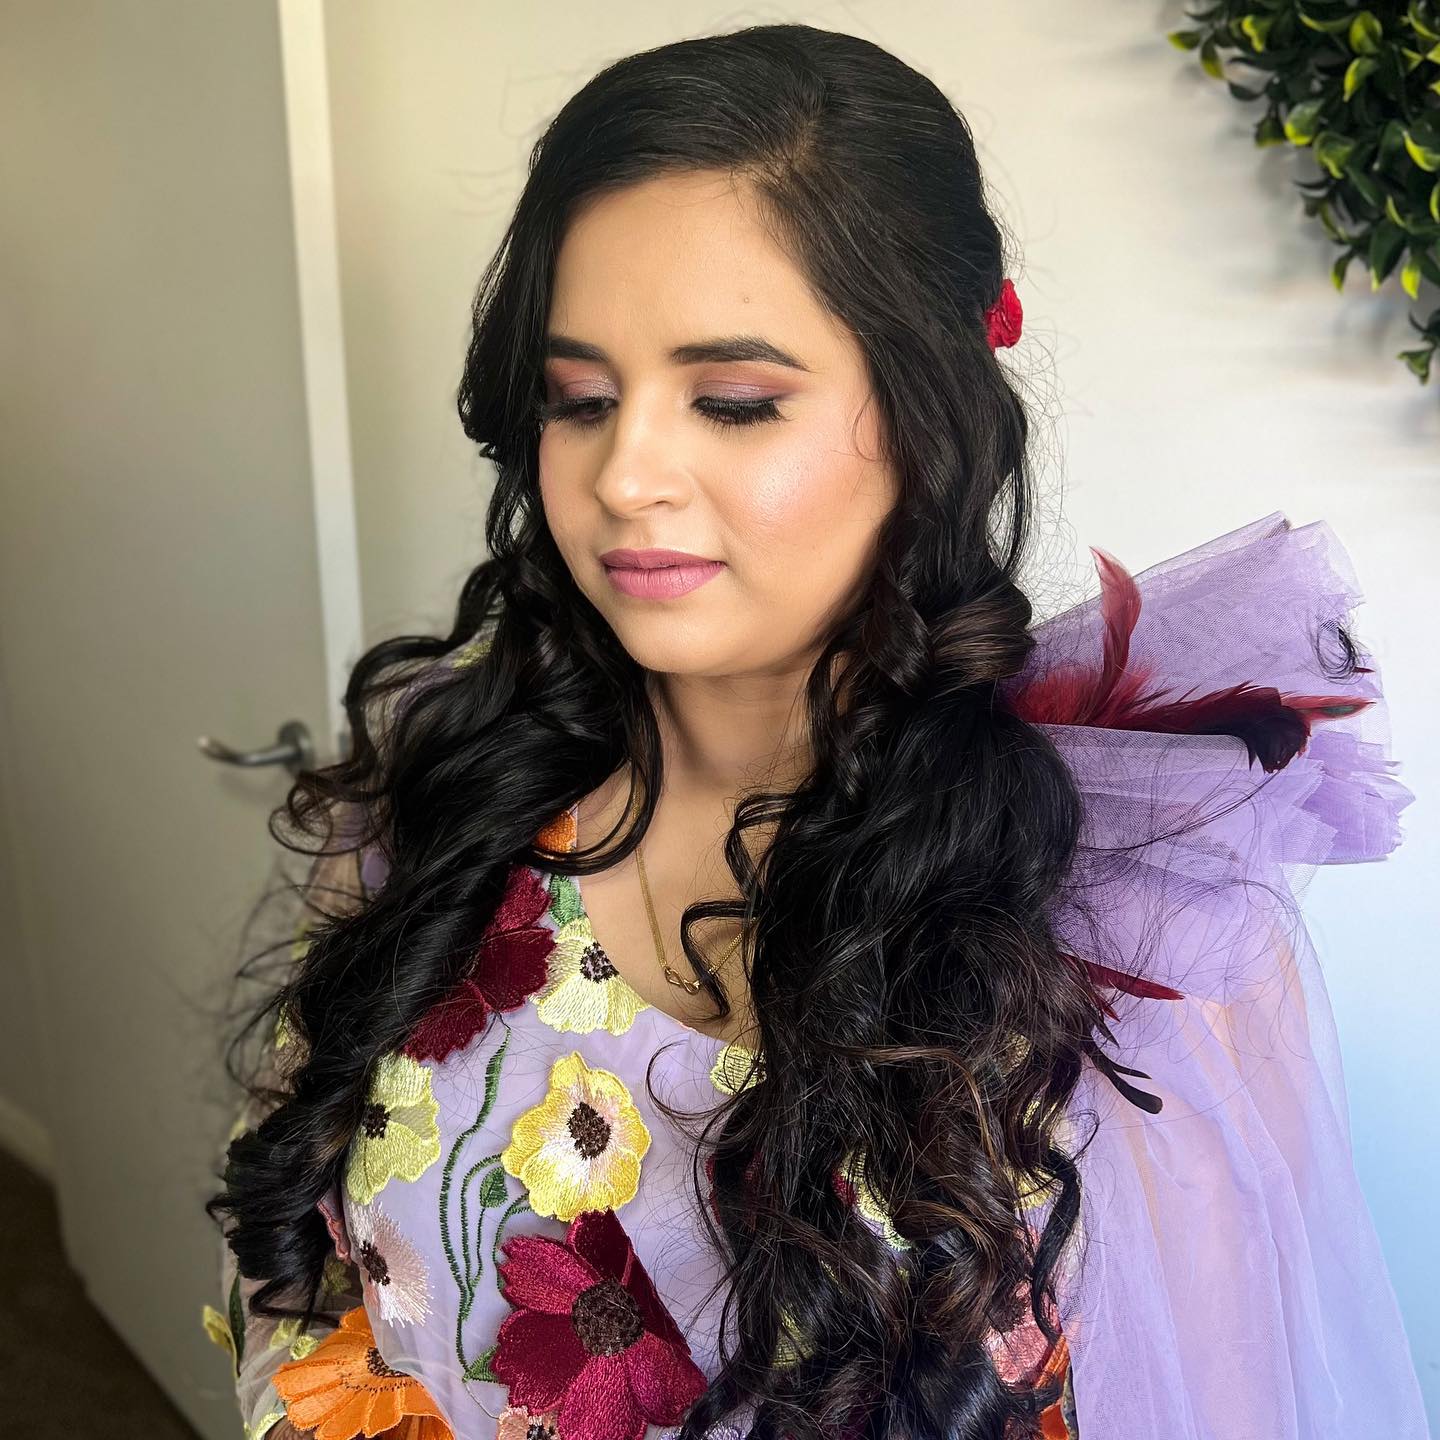 ✨RAMANDEEP✨

Baby shower glam for this mama to be!  We went for moderately glam eyes, soft lips and soft curls to bring it all together 🫶🏻

———————————————————————————
DM to secure a booking for your big day or special occasion.
———————————————————————————
❗️1:1 Personal Makeup Lessons Now Available. Enquire via the website in bio for more information.
———————————————————————————
#makeupartistsydney  #sydneymakeupartist #sydneymakeupartists  #100wattskin #sydneymua #sydneybridalmakeup #maccosmetics #fullglam #glammakeup #dewyskin  #toptags #motd #ootd  #fullglam #softglam #mumtobe #dayglam #radiantmakeup #glowymakeup #photography #nofilter #motd #softdayglam #lavender #babyshower #babyshowermakeup #softglammakeup